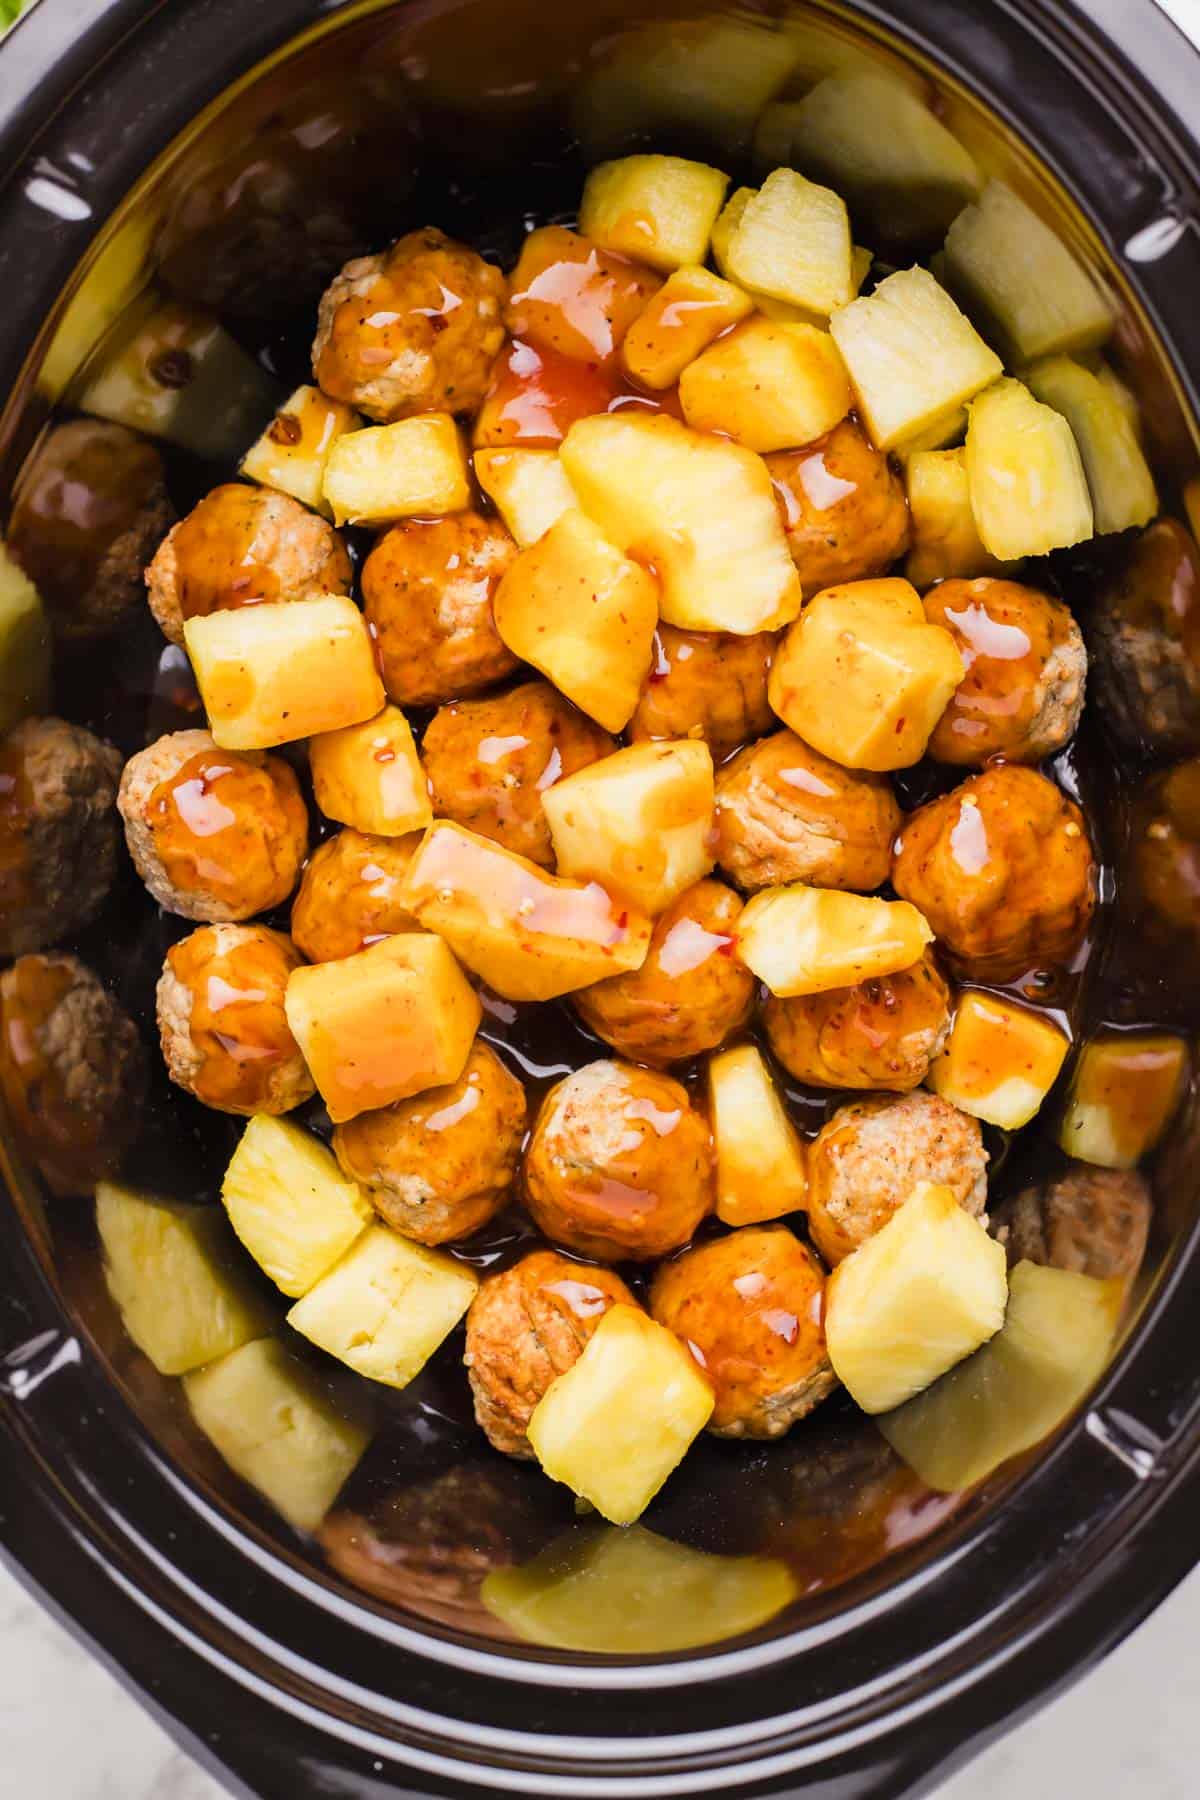 sweet and sour sauce poured over pineapple and meatball mixture in the insert of a slow cooker